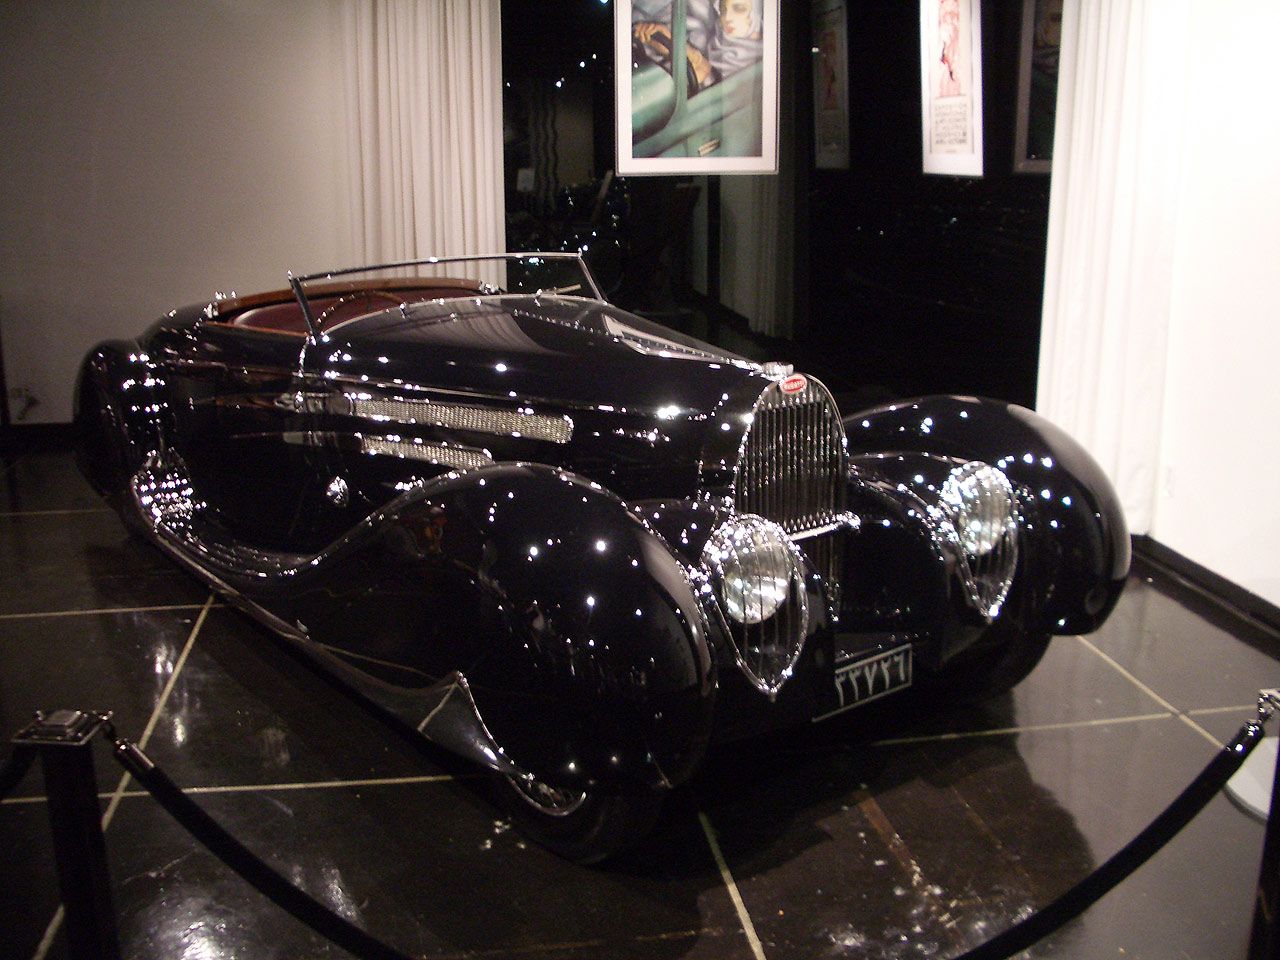 an antique black car on display inside of a museum